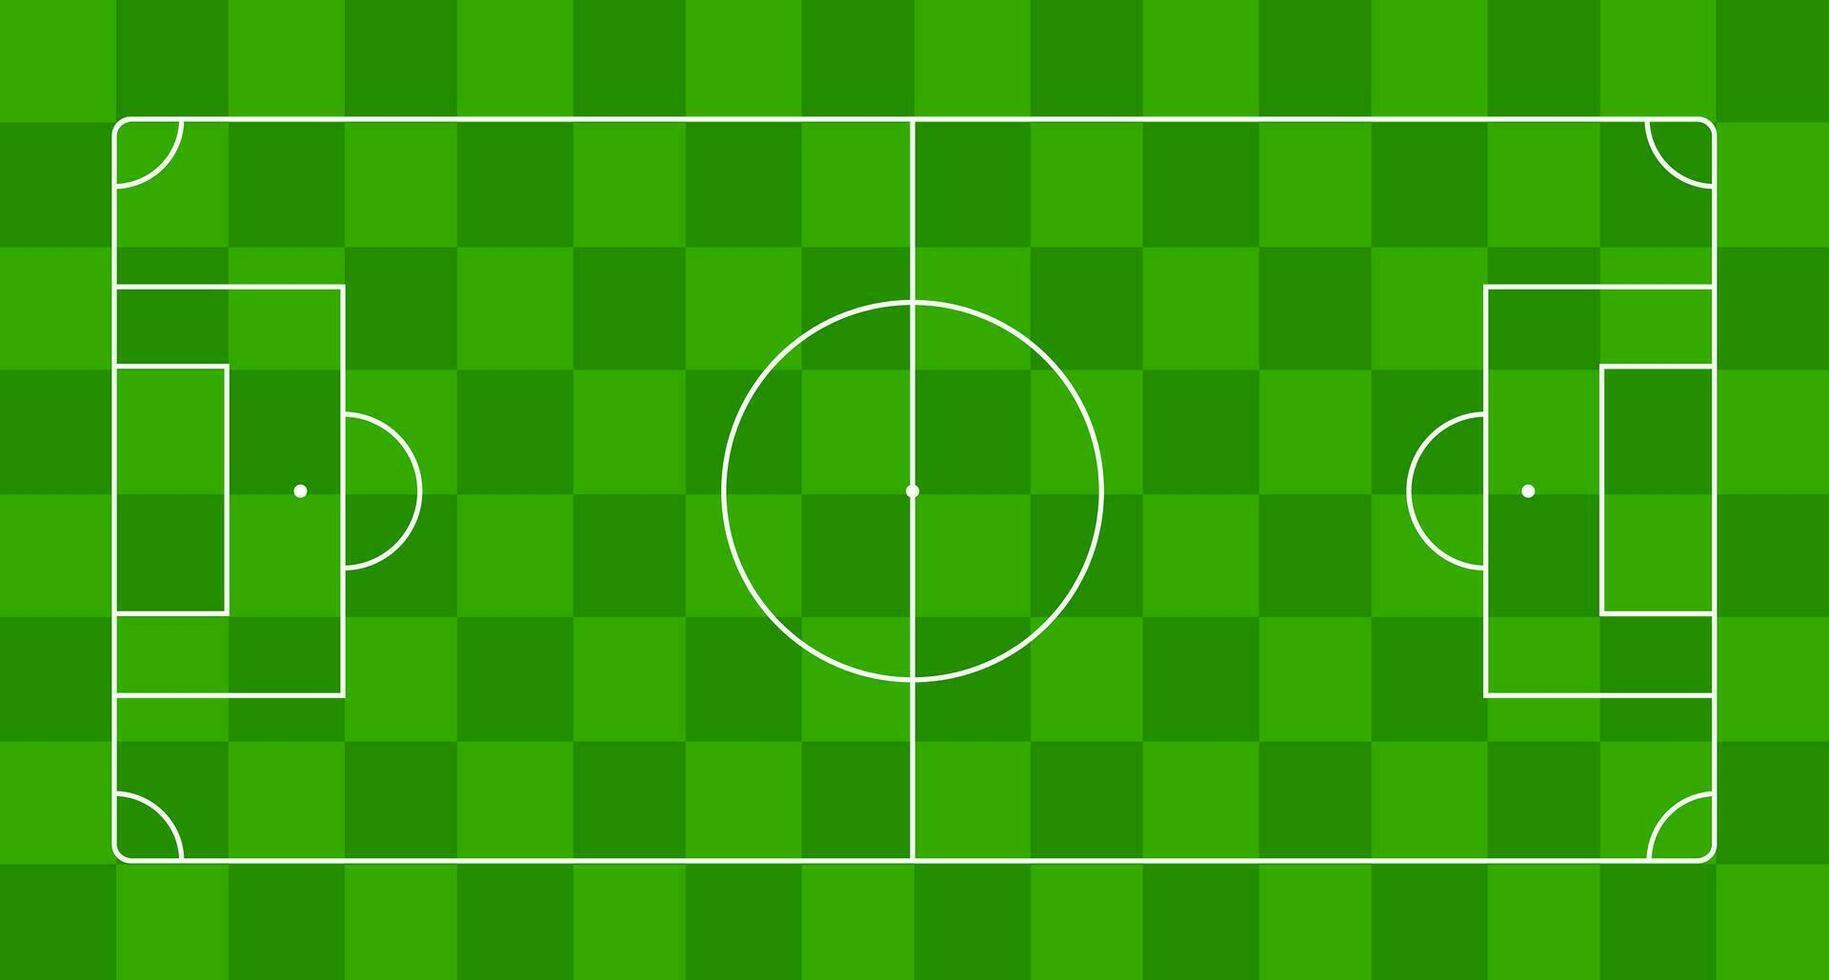 Square-striped green field template for soccer. Football game field scheme vector